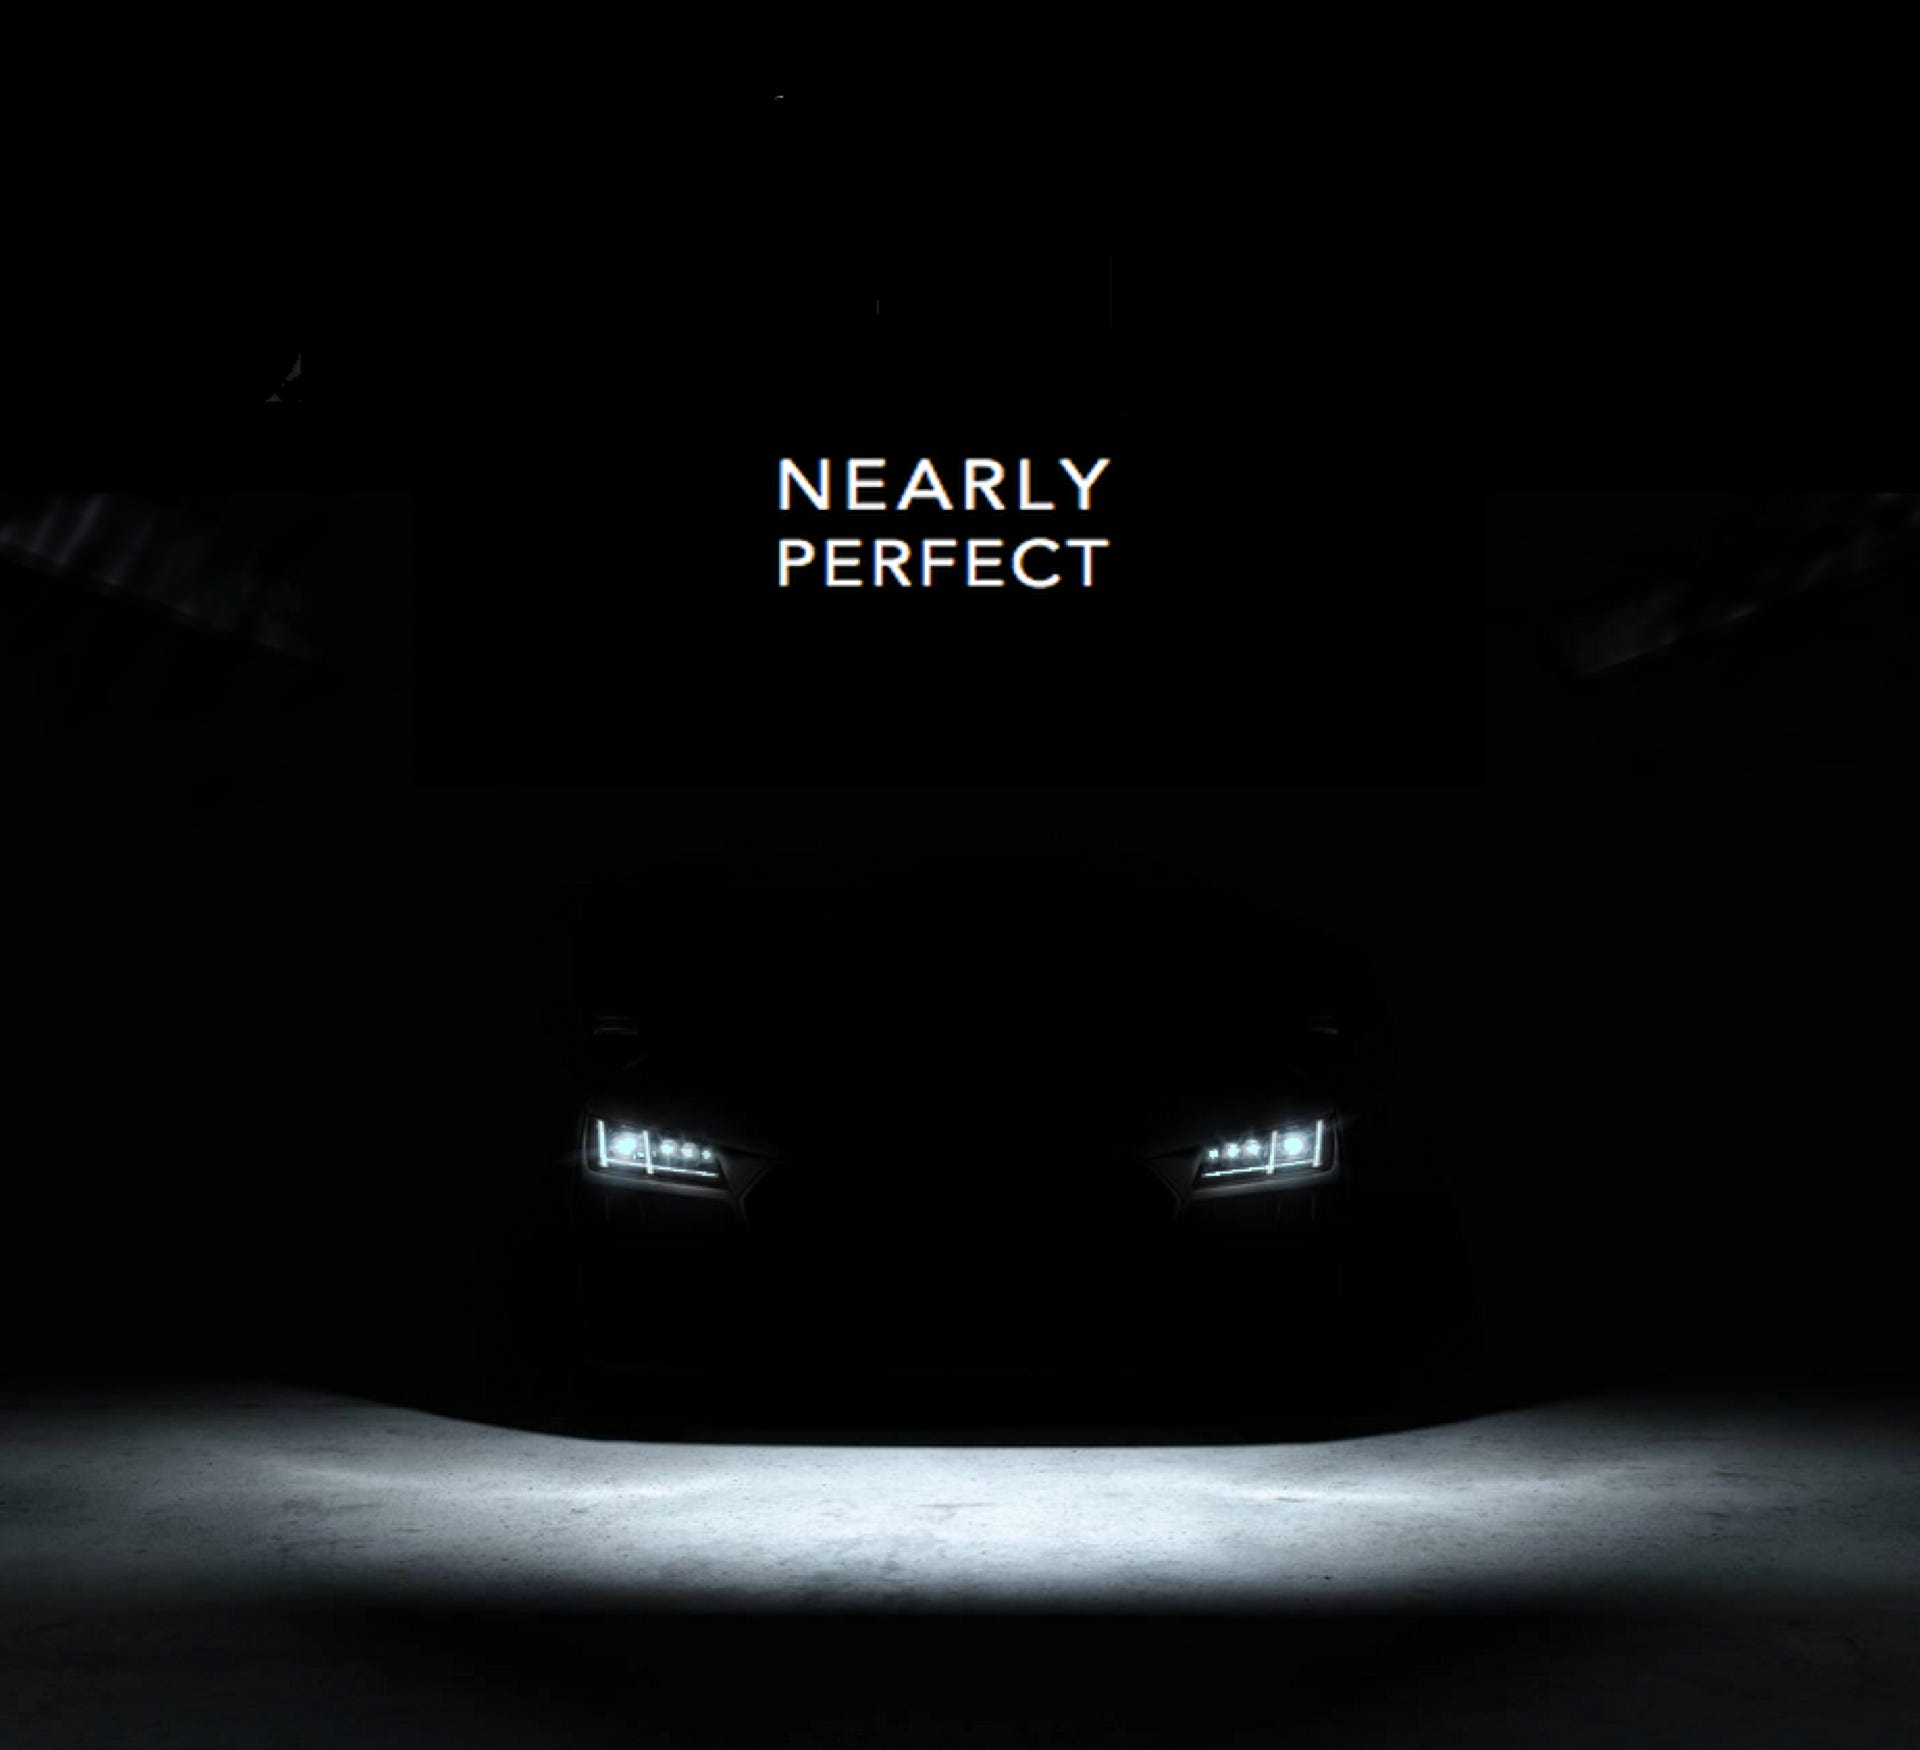 NP_NEARLY_PERFECT/NEARLY_PERFECT/NP/ARMIN_RUSCHEINSKY/NEARLY_PERFEFCT